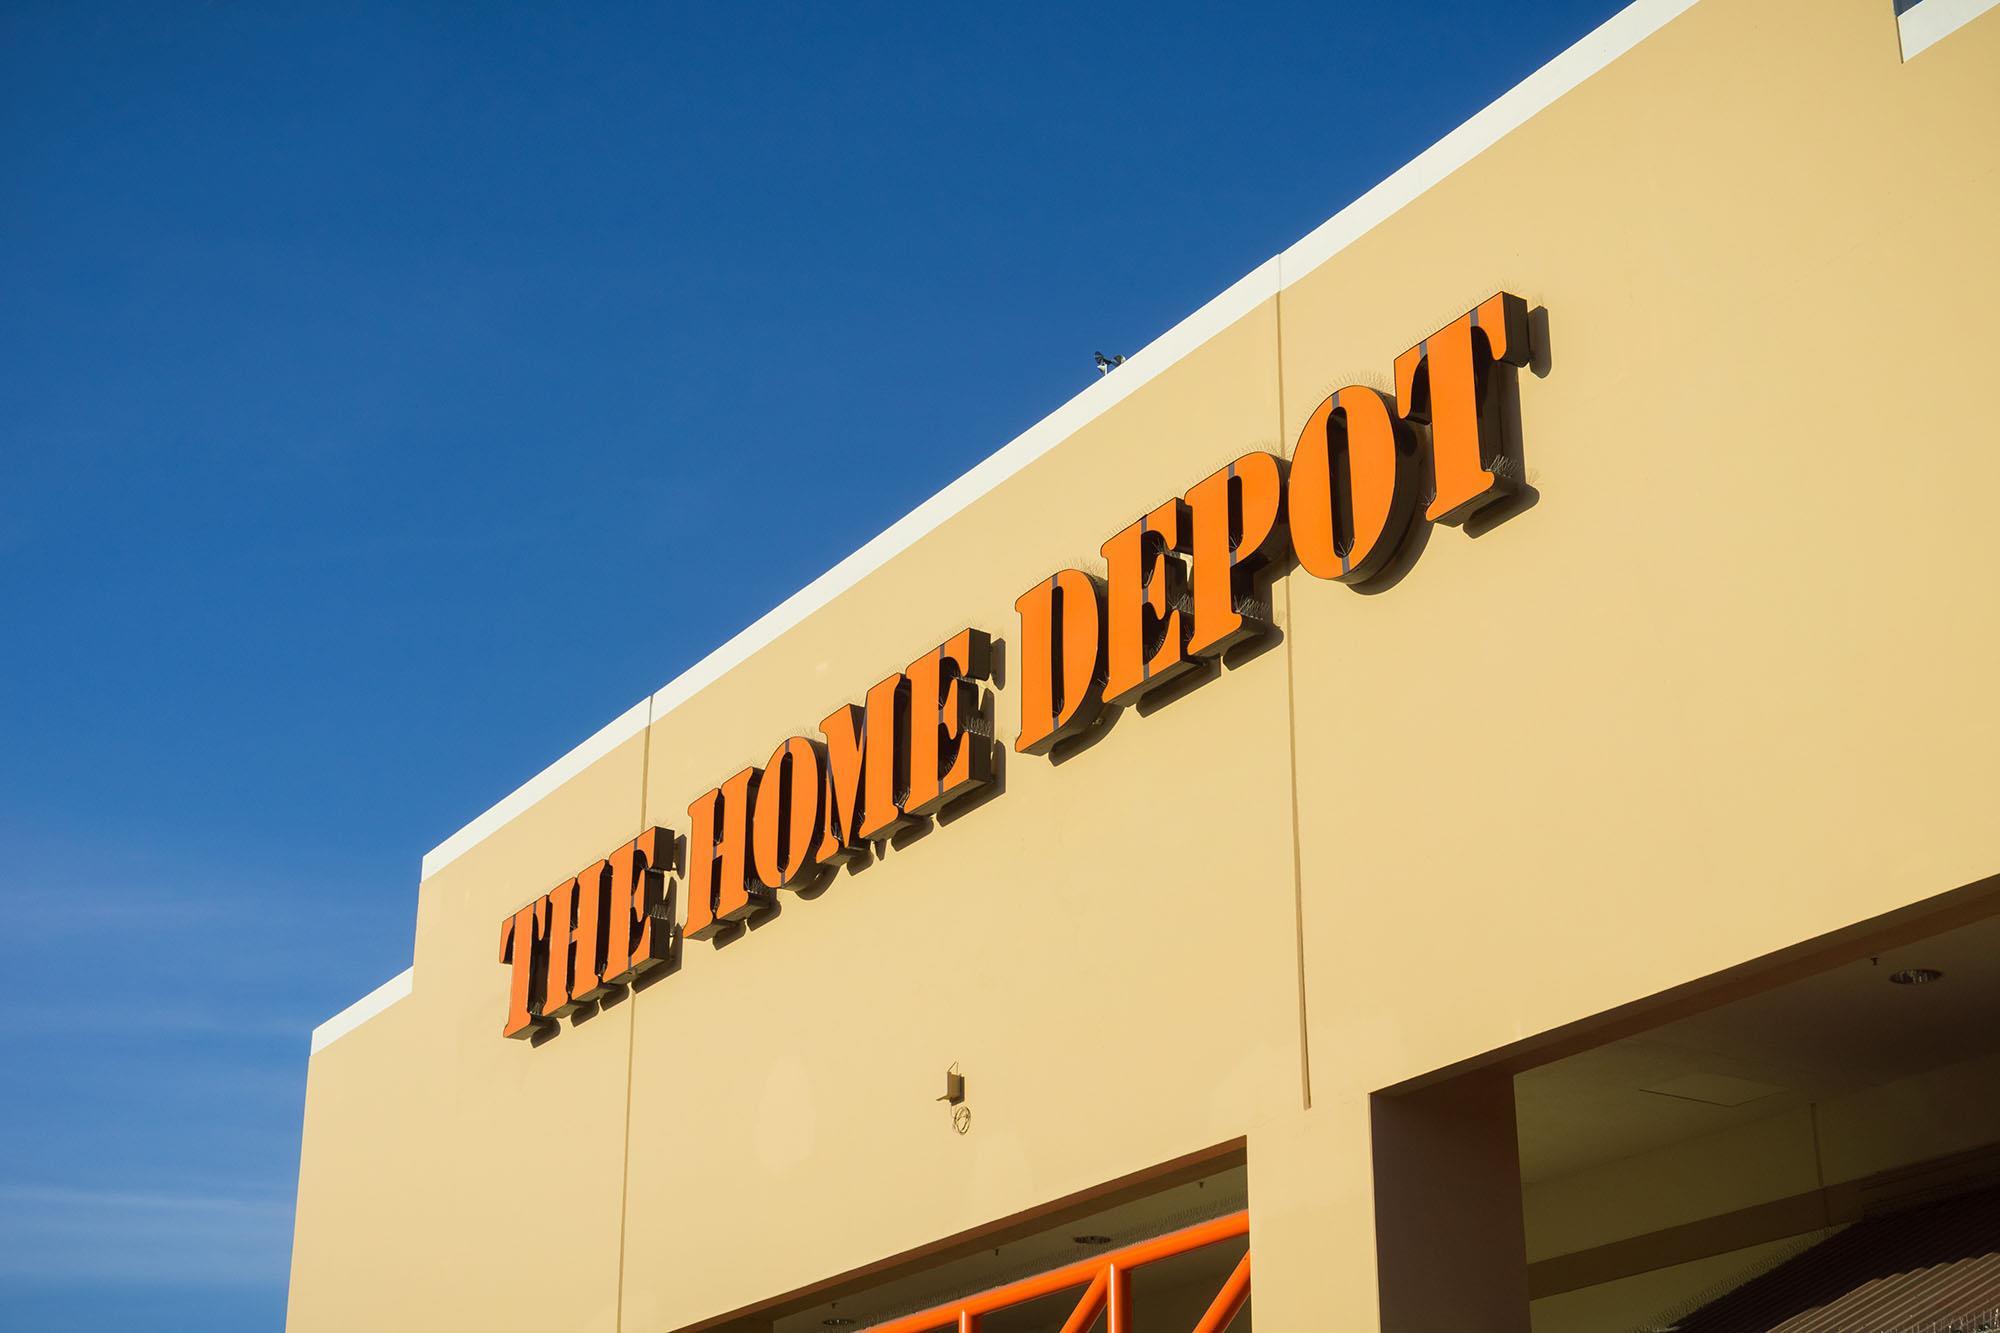 DOJ-informed compliance guidance helps Home Depot prep for potential  scrutiny | Article | Compliance Week